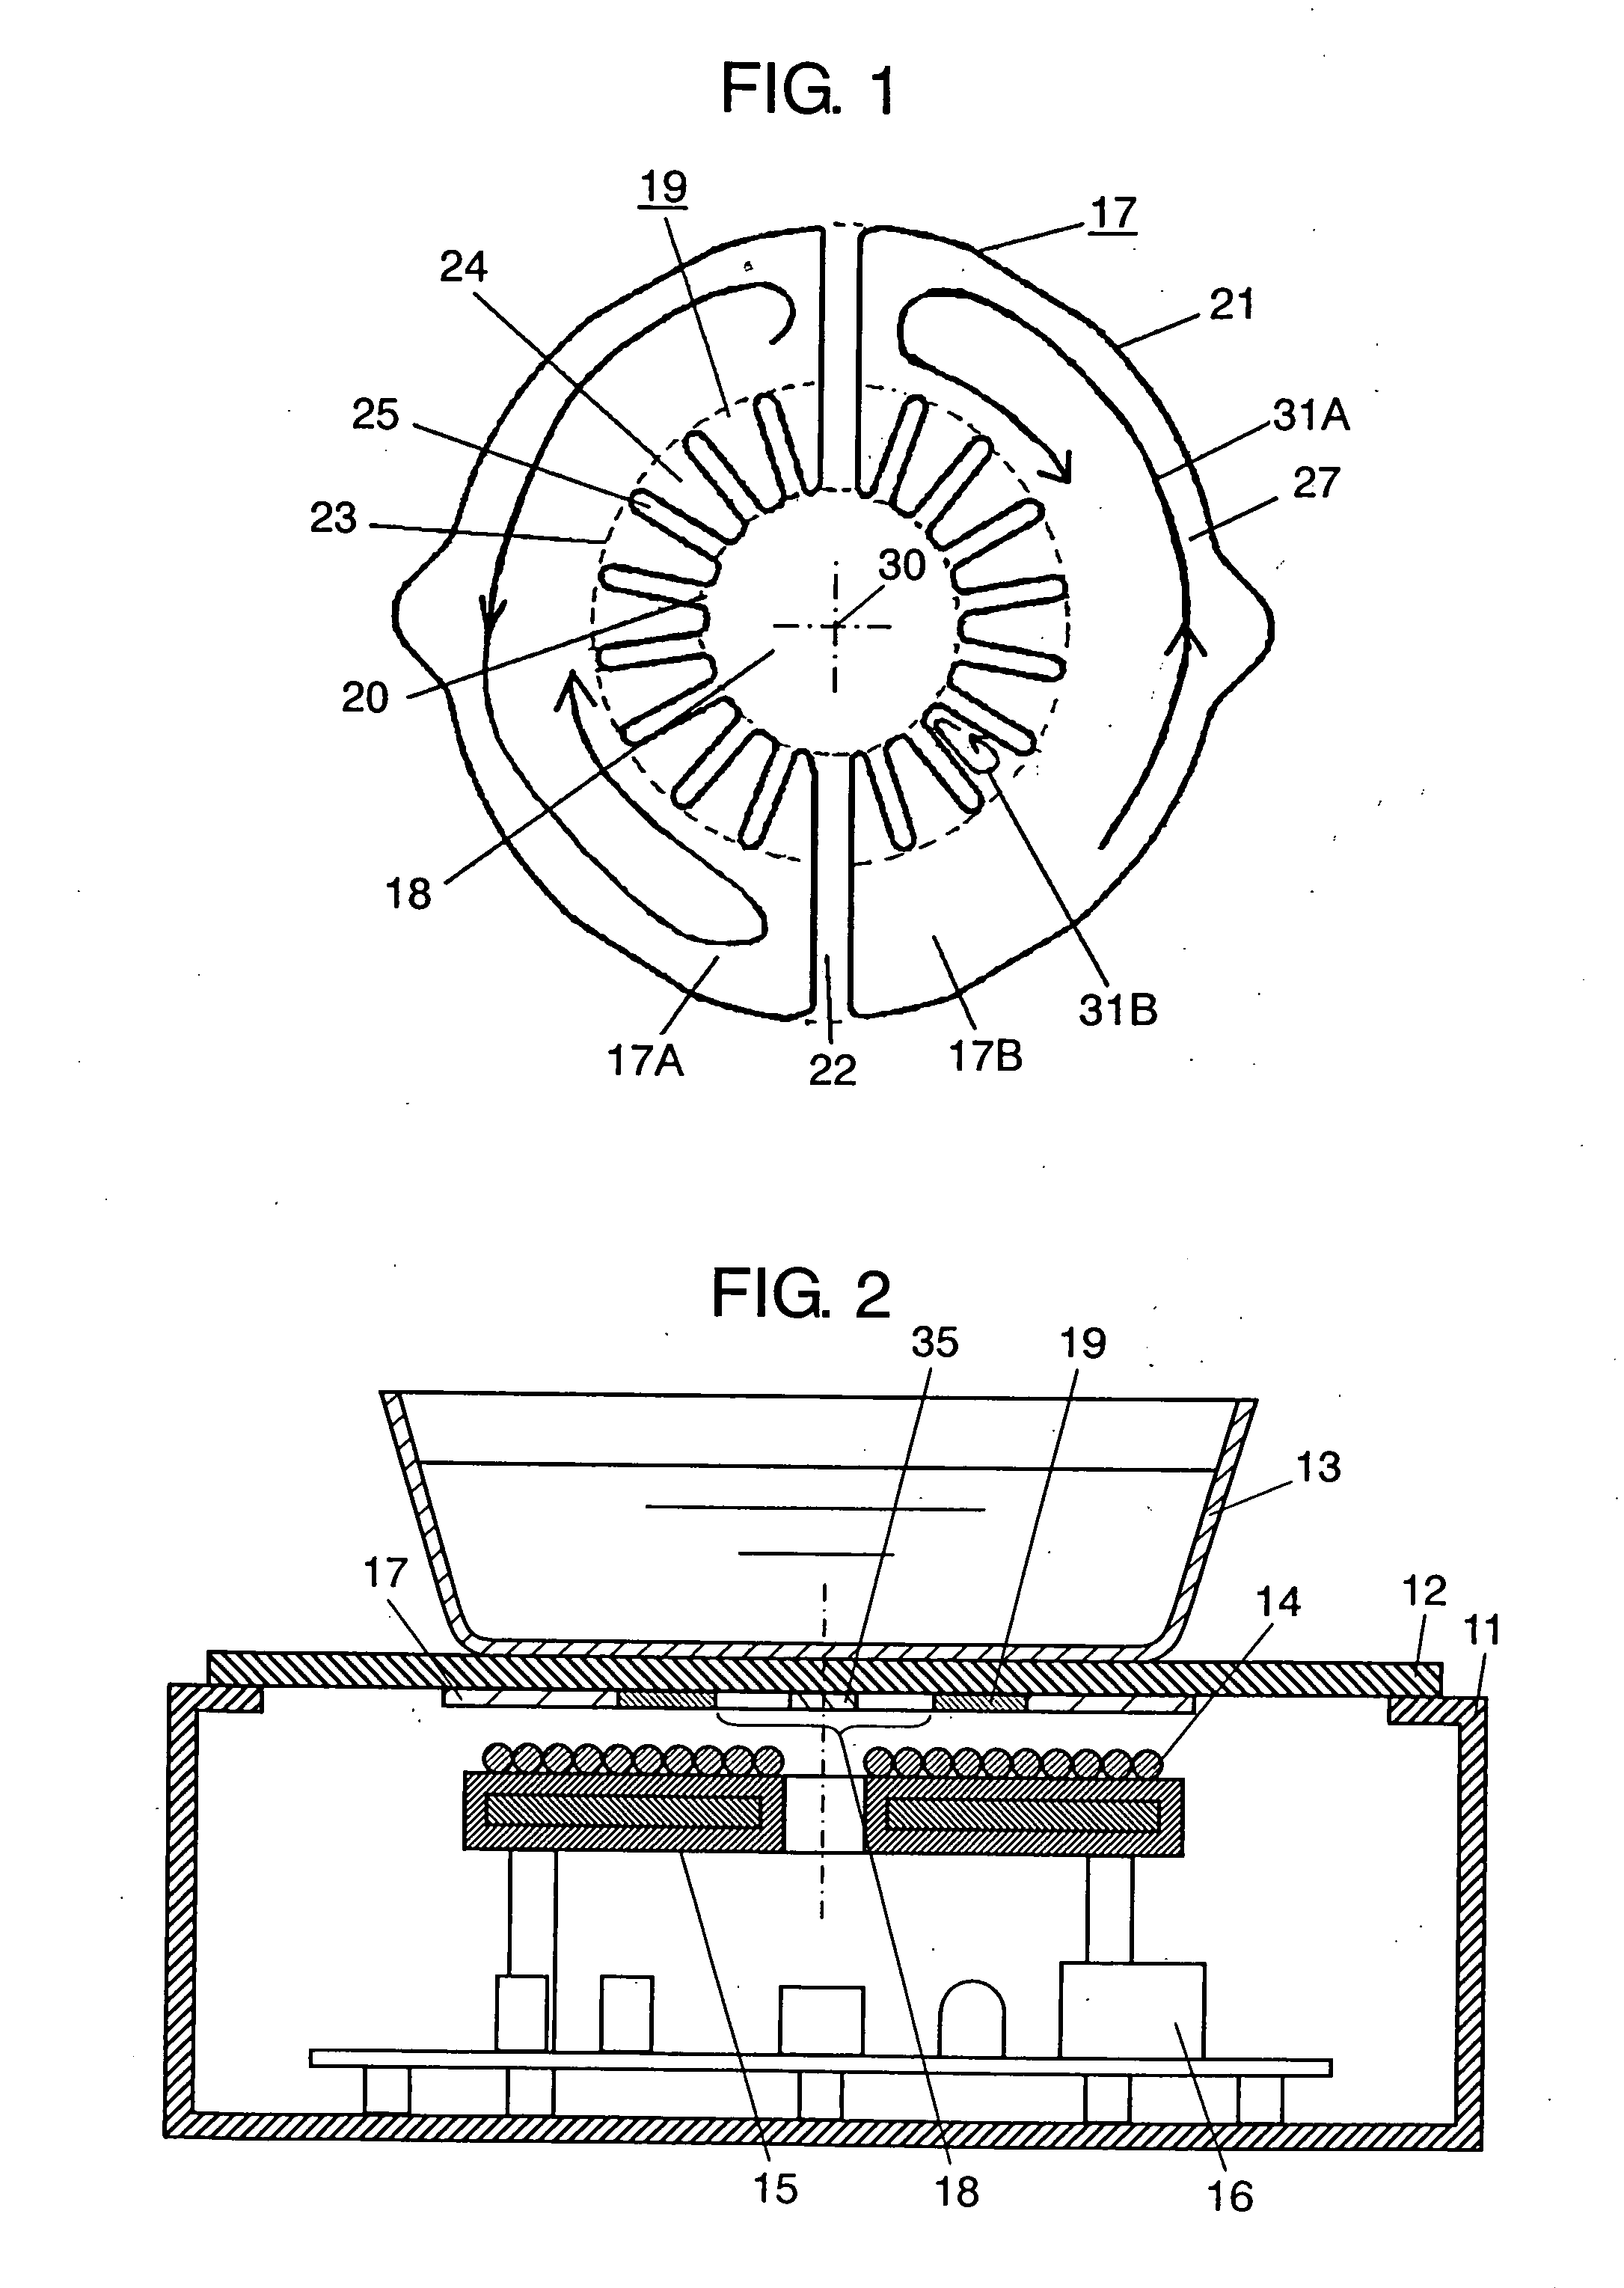 Induction heater